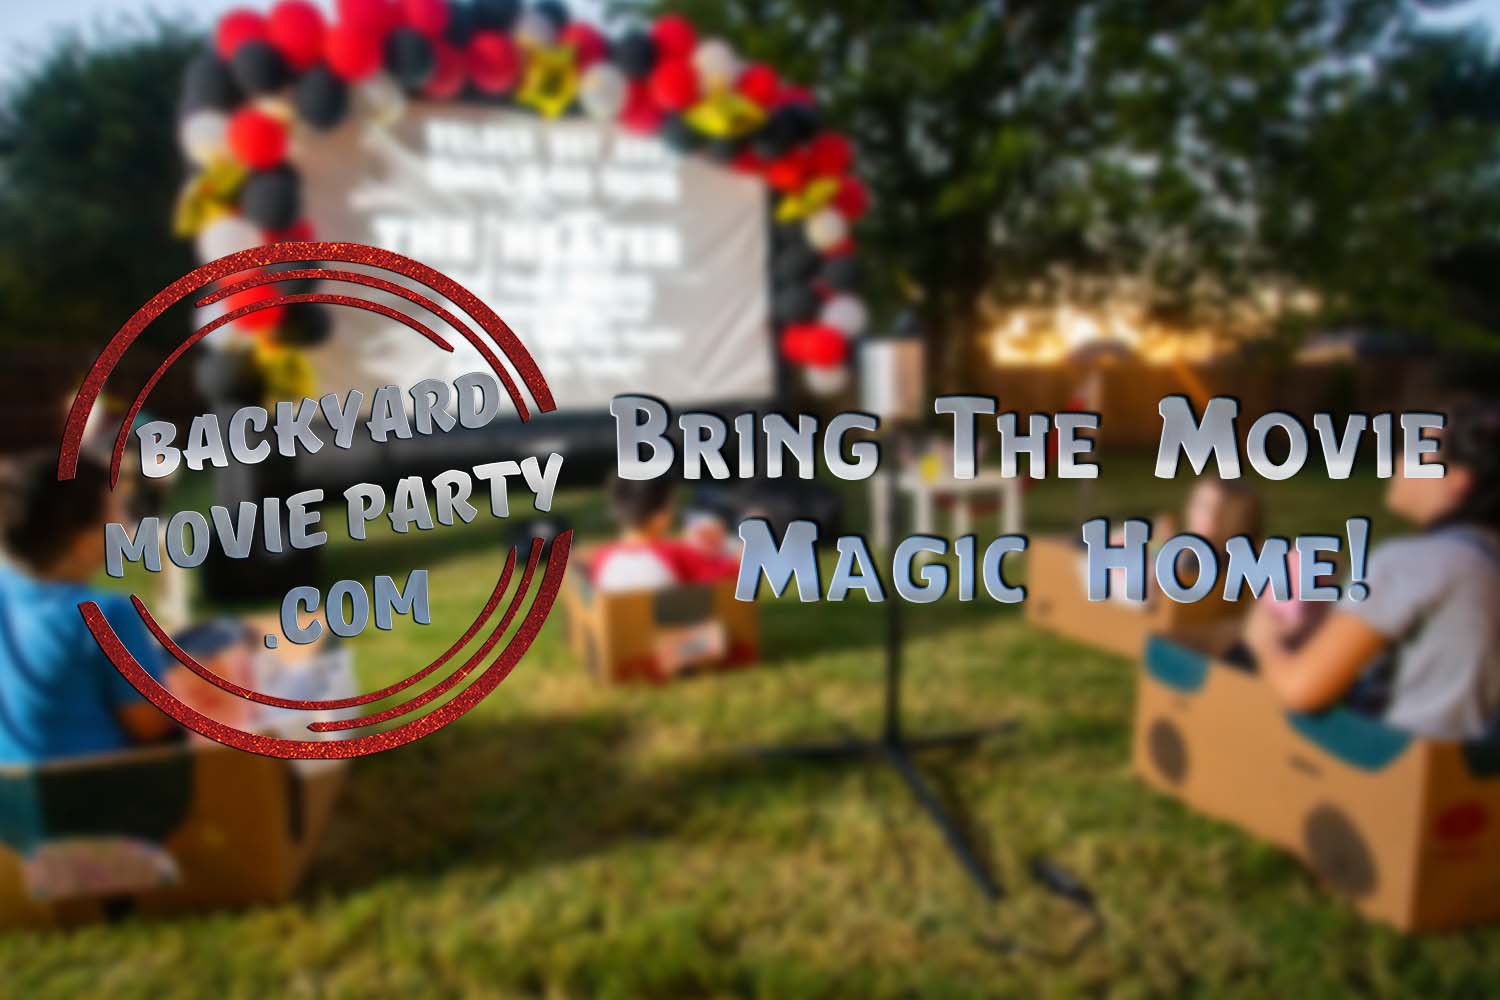 Backyard movie party logo, Bring the movie home text, kids sitting watching movie background.